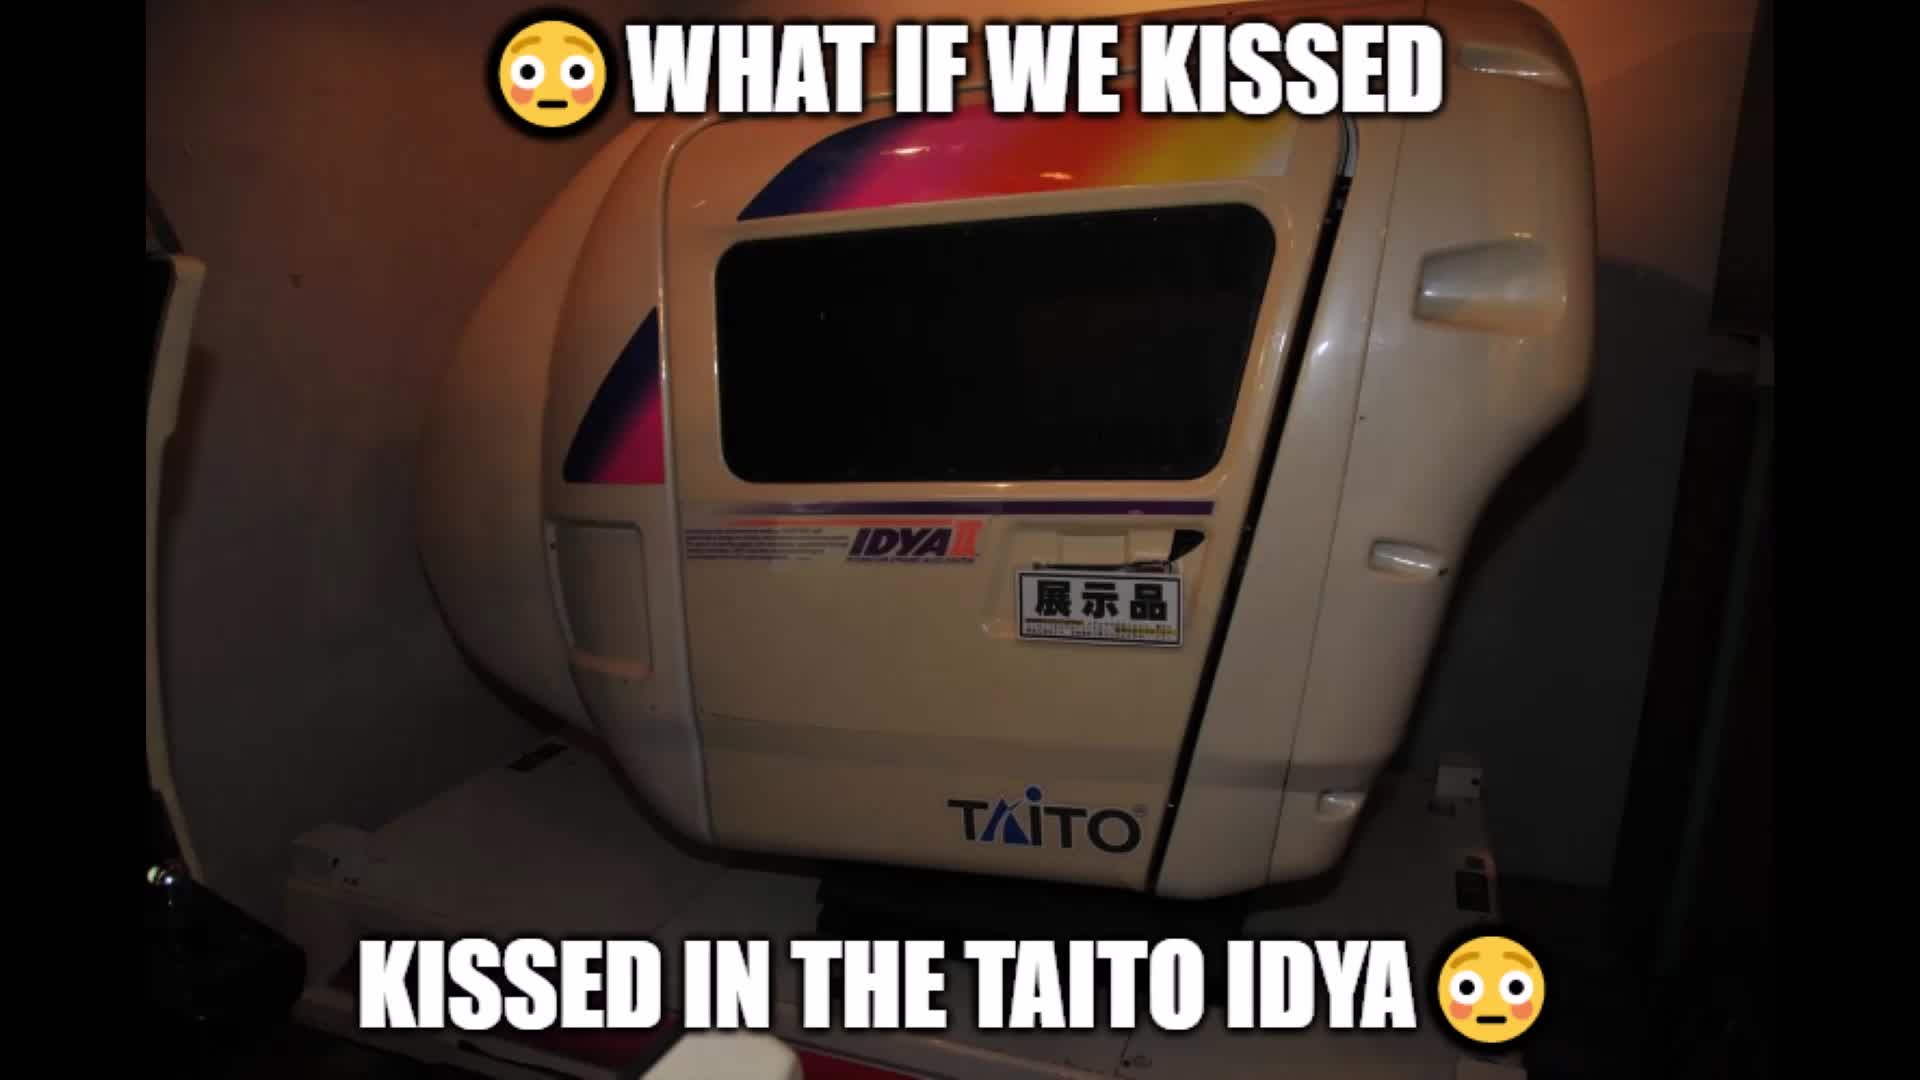 what if we kissed in the taito idya jkjkjkjjk unless?